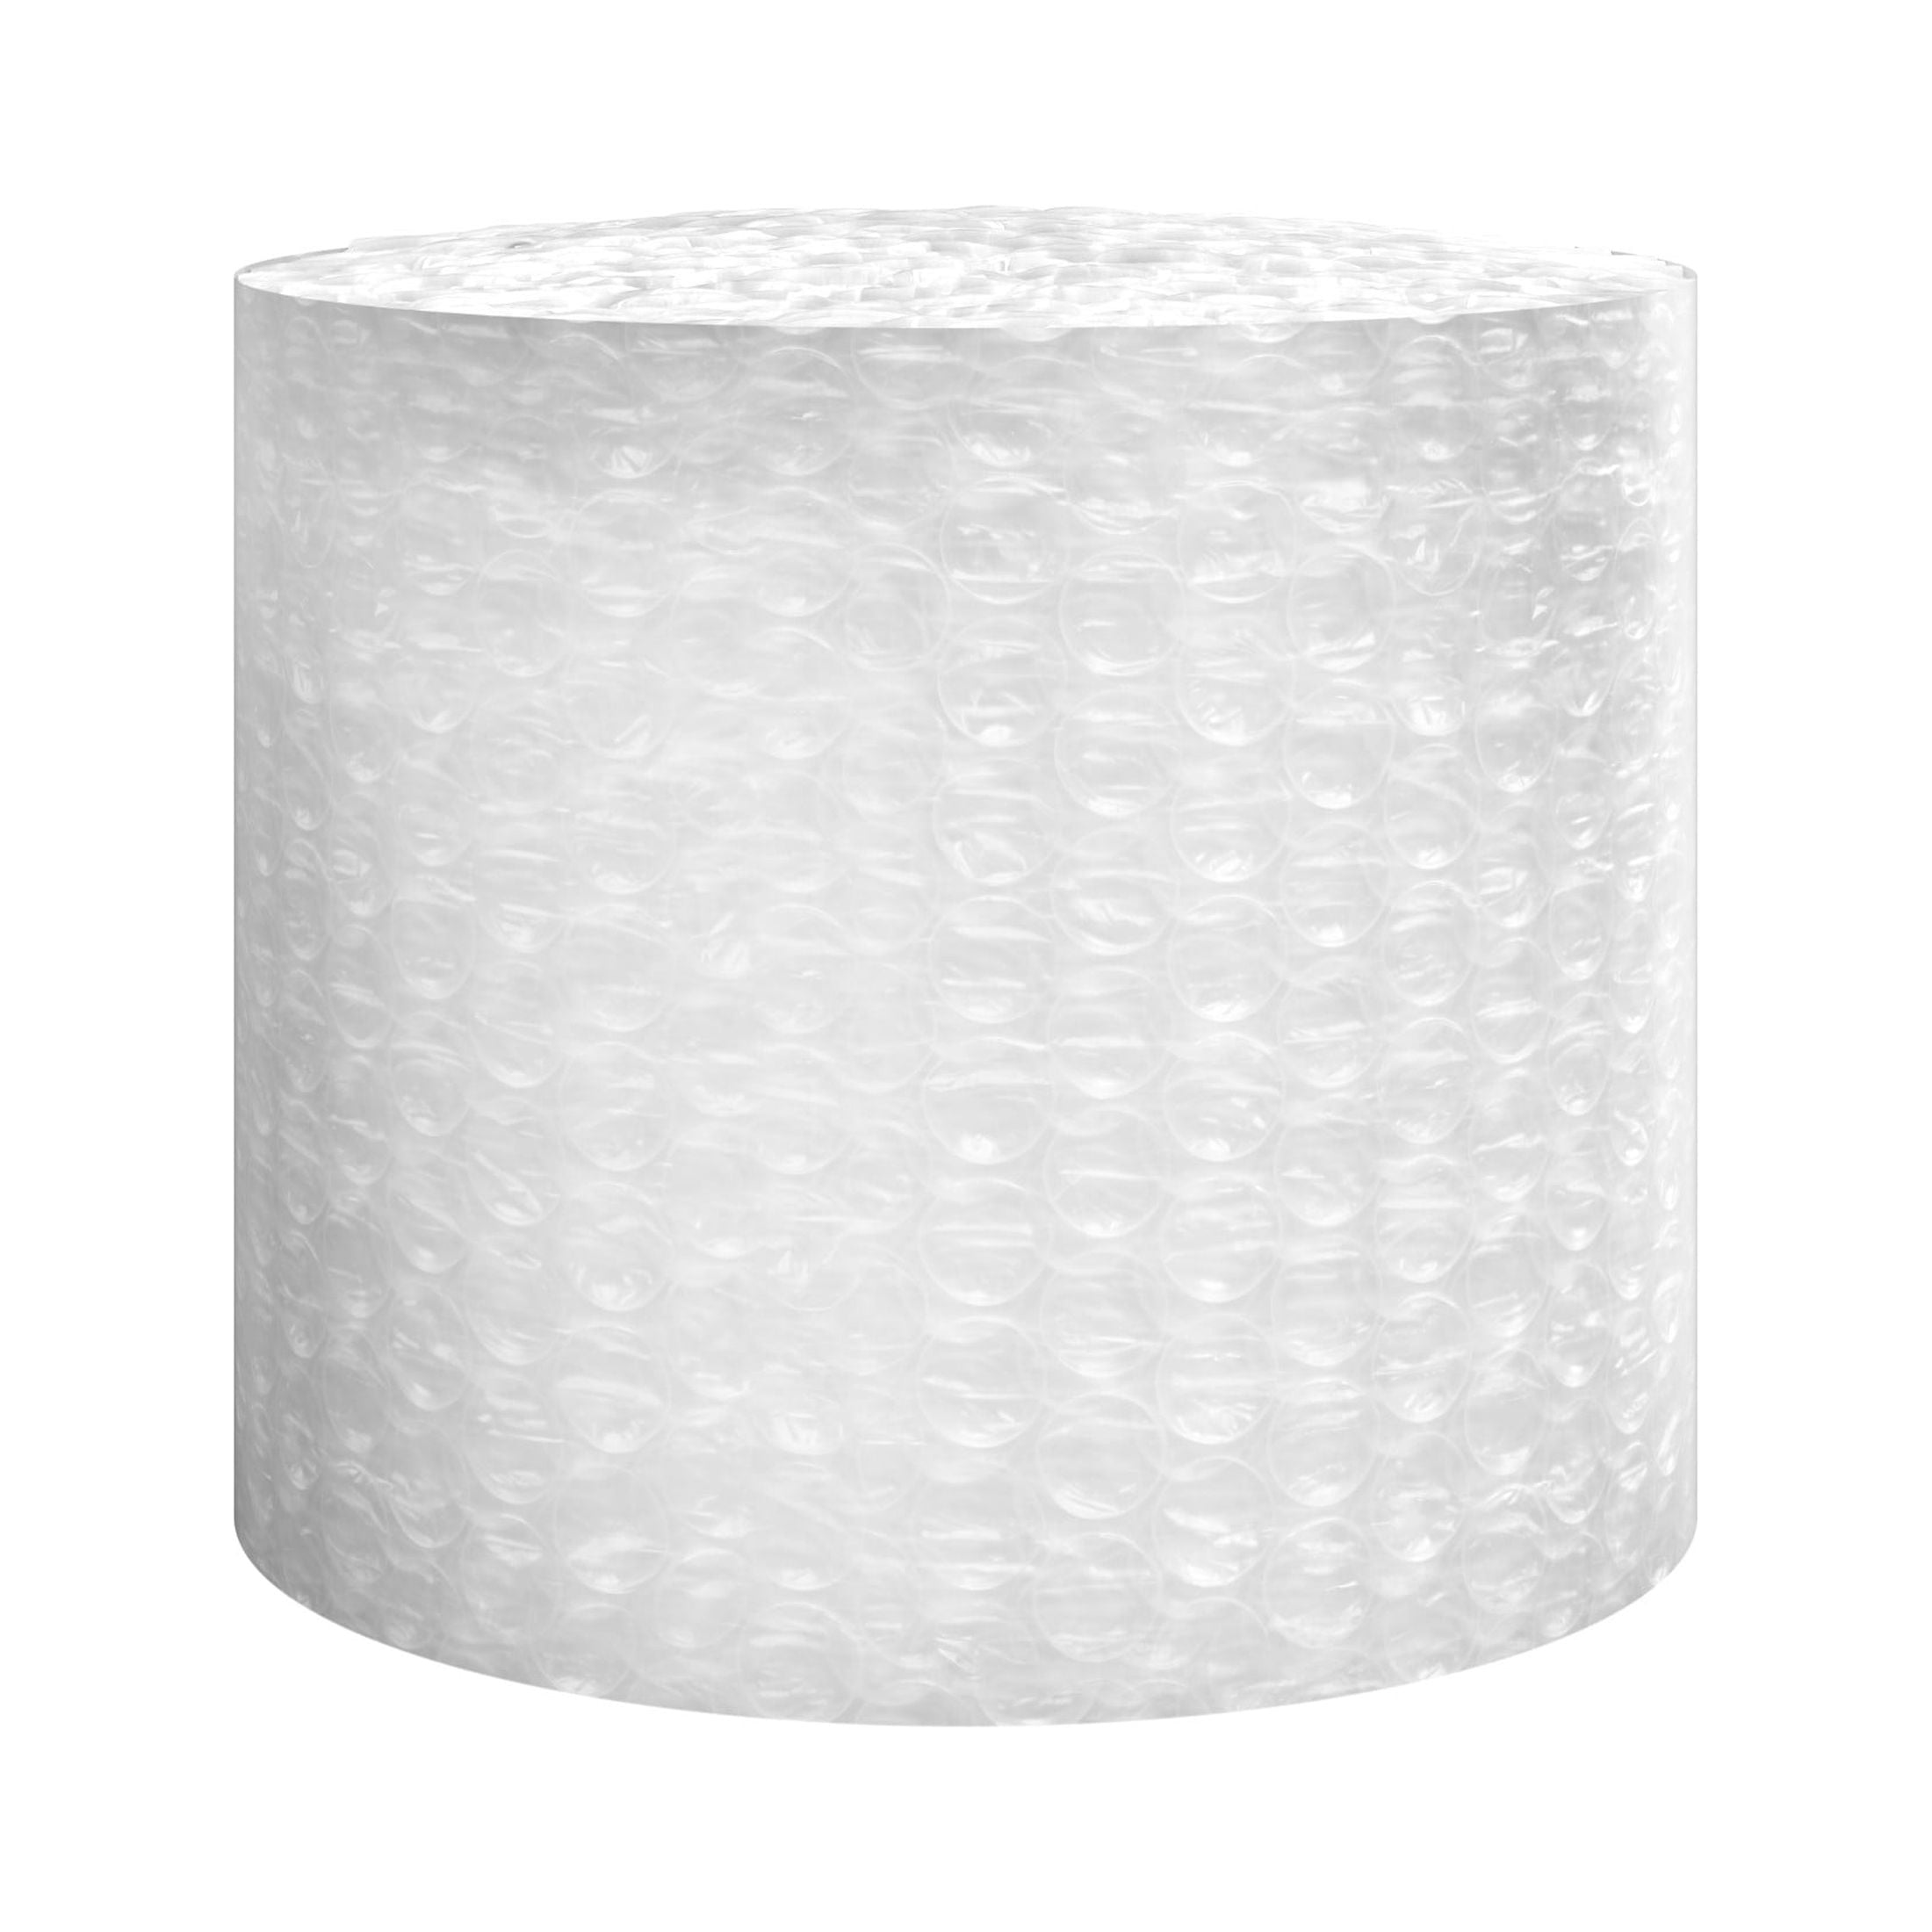 Bubble wrap 100 ft² 1/2 Large Bubble- Perforated Every 12''- with 10  Fragile Stickers by Fresh Farm LLC